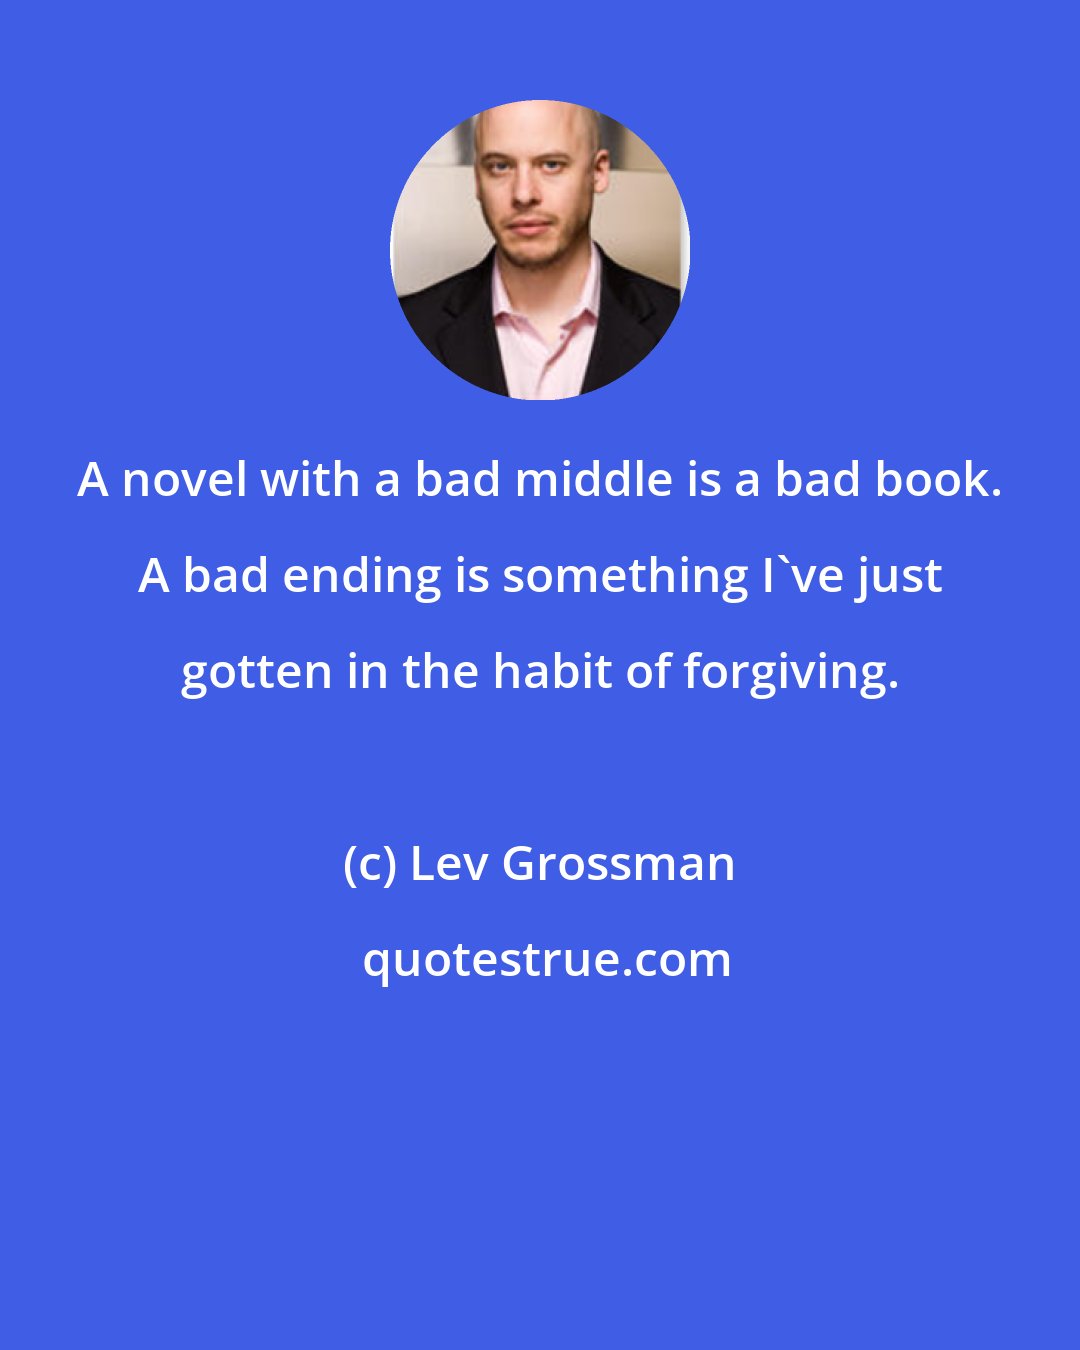 Lev Grossman: A novel with a bad middle is a bad book. A bad ending is something I've just gotten in the habit of forgiving.